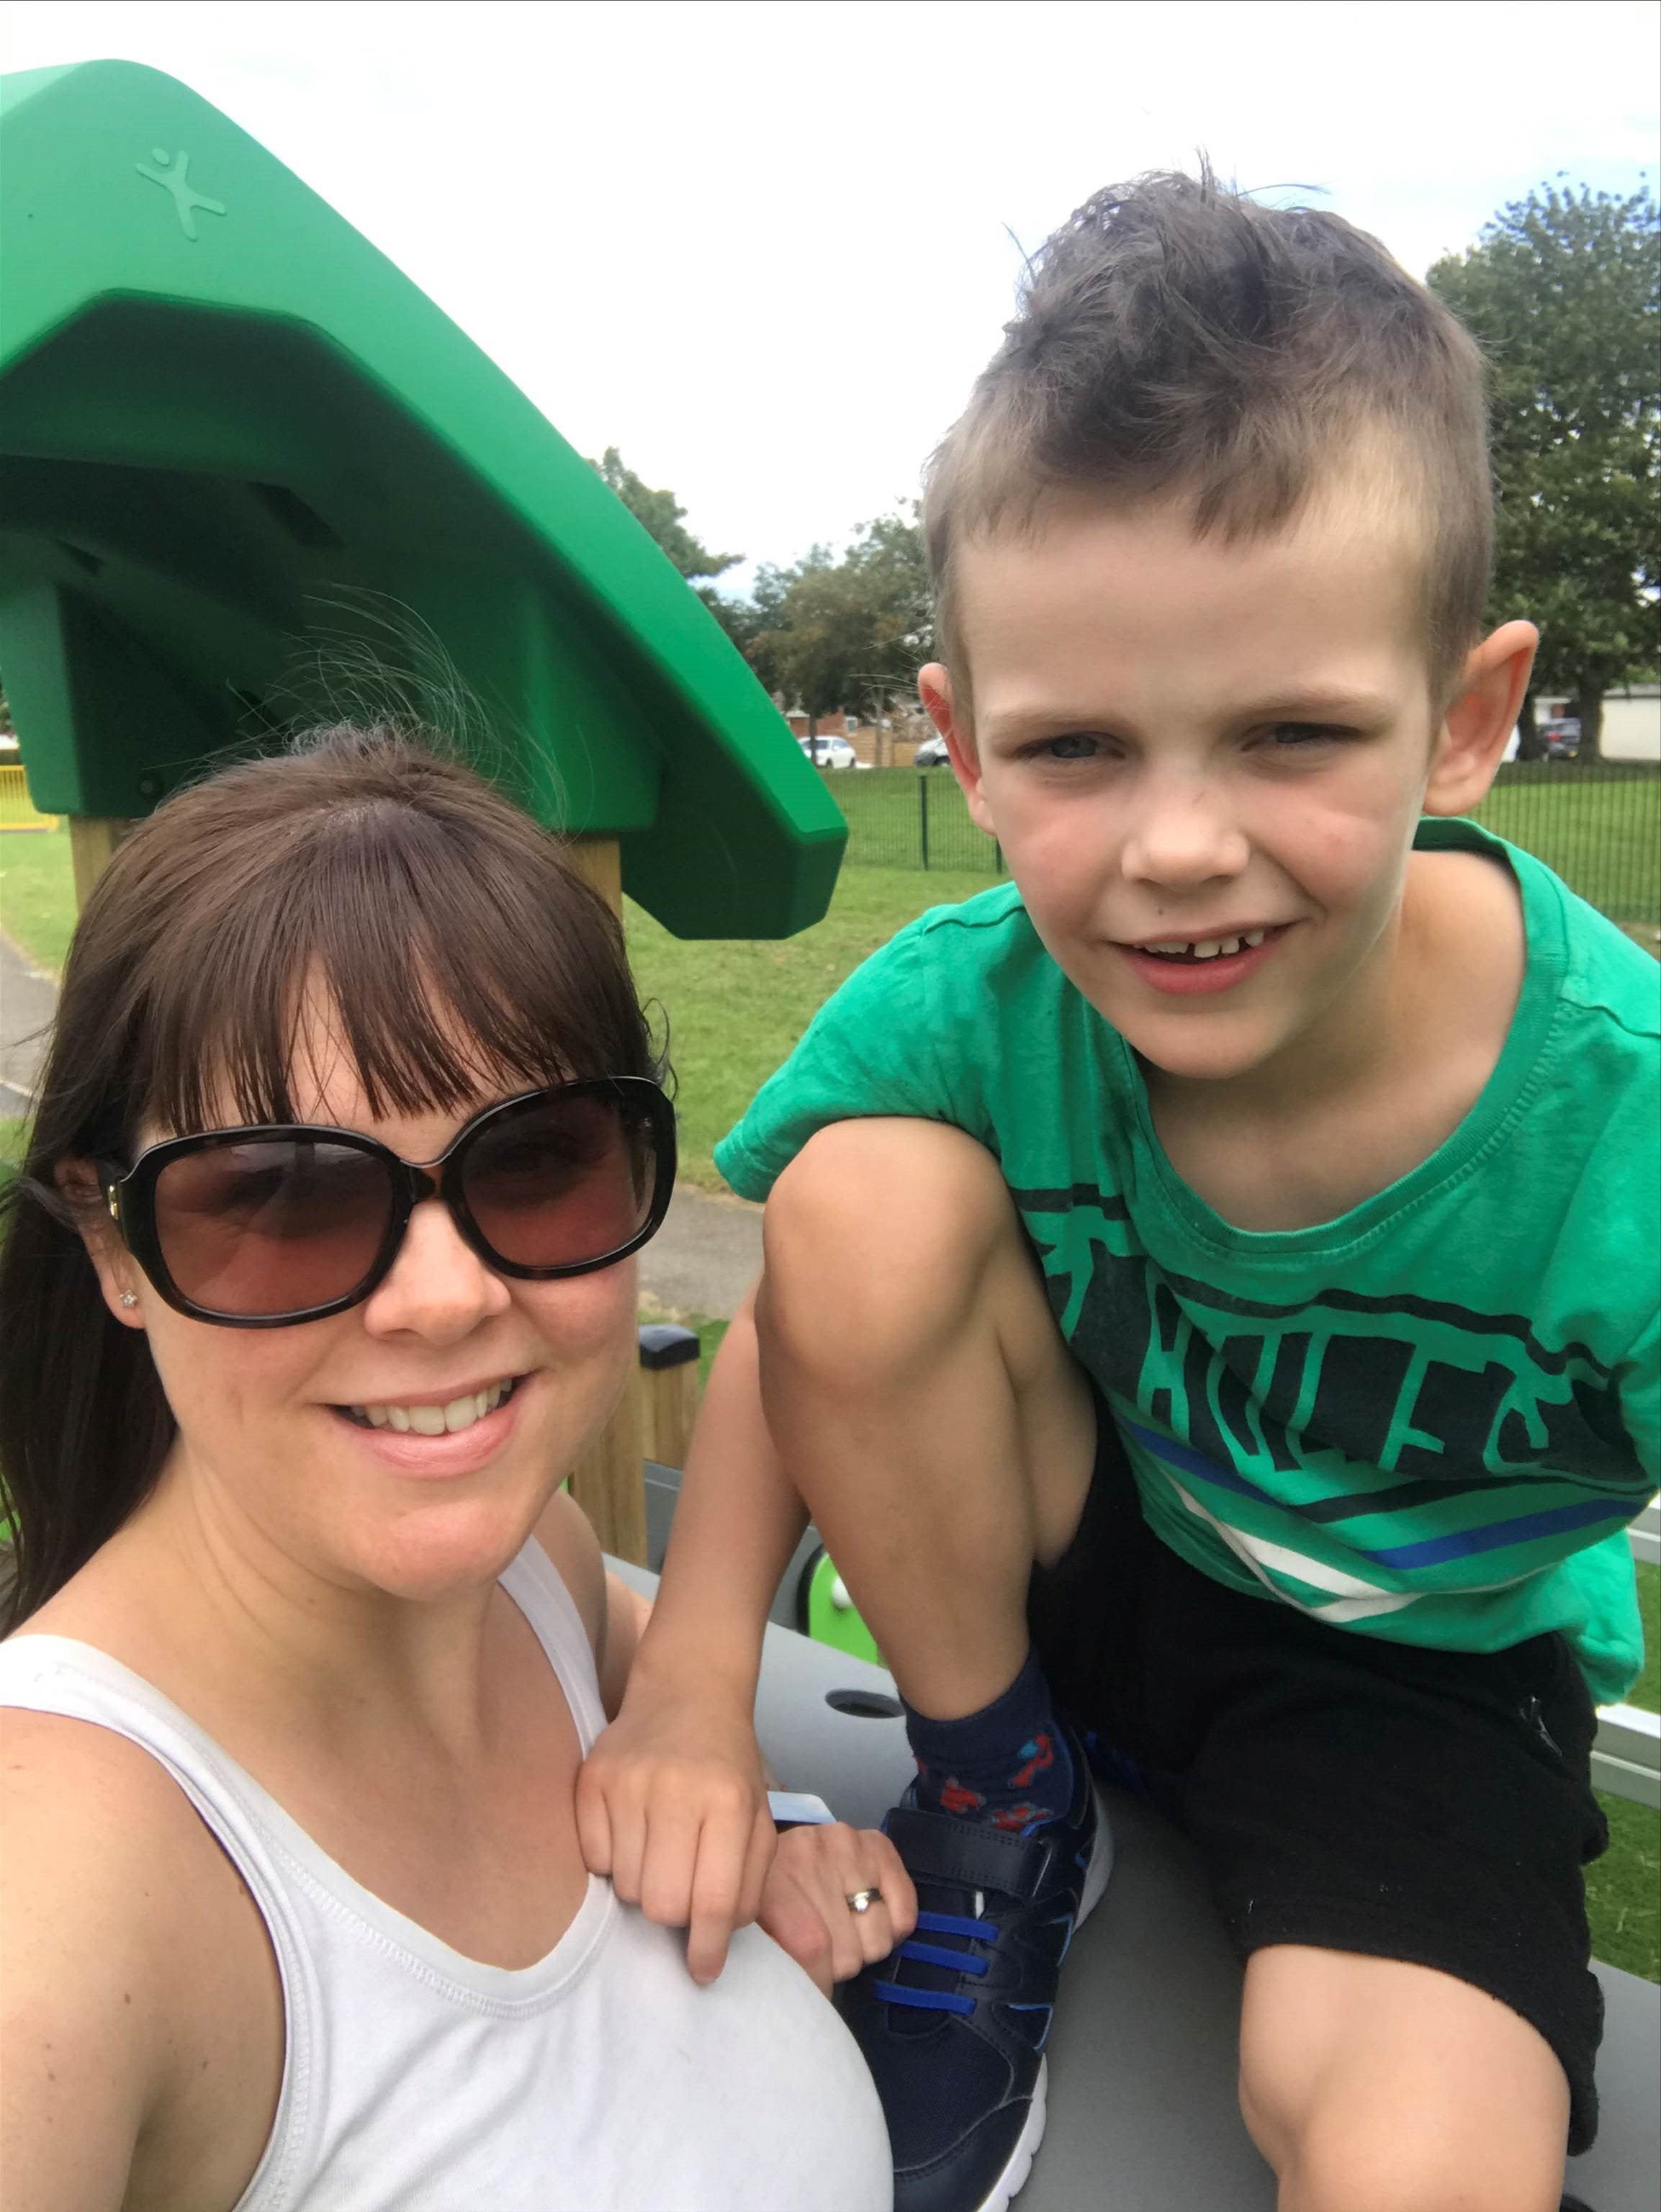 Sarah Collier, 38, says she has felt ‘isolated’ while coping with additional challenges in caring for her disabled son during the pandemic&nbsp;